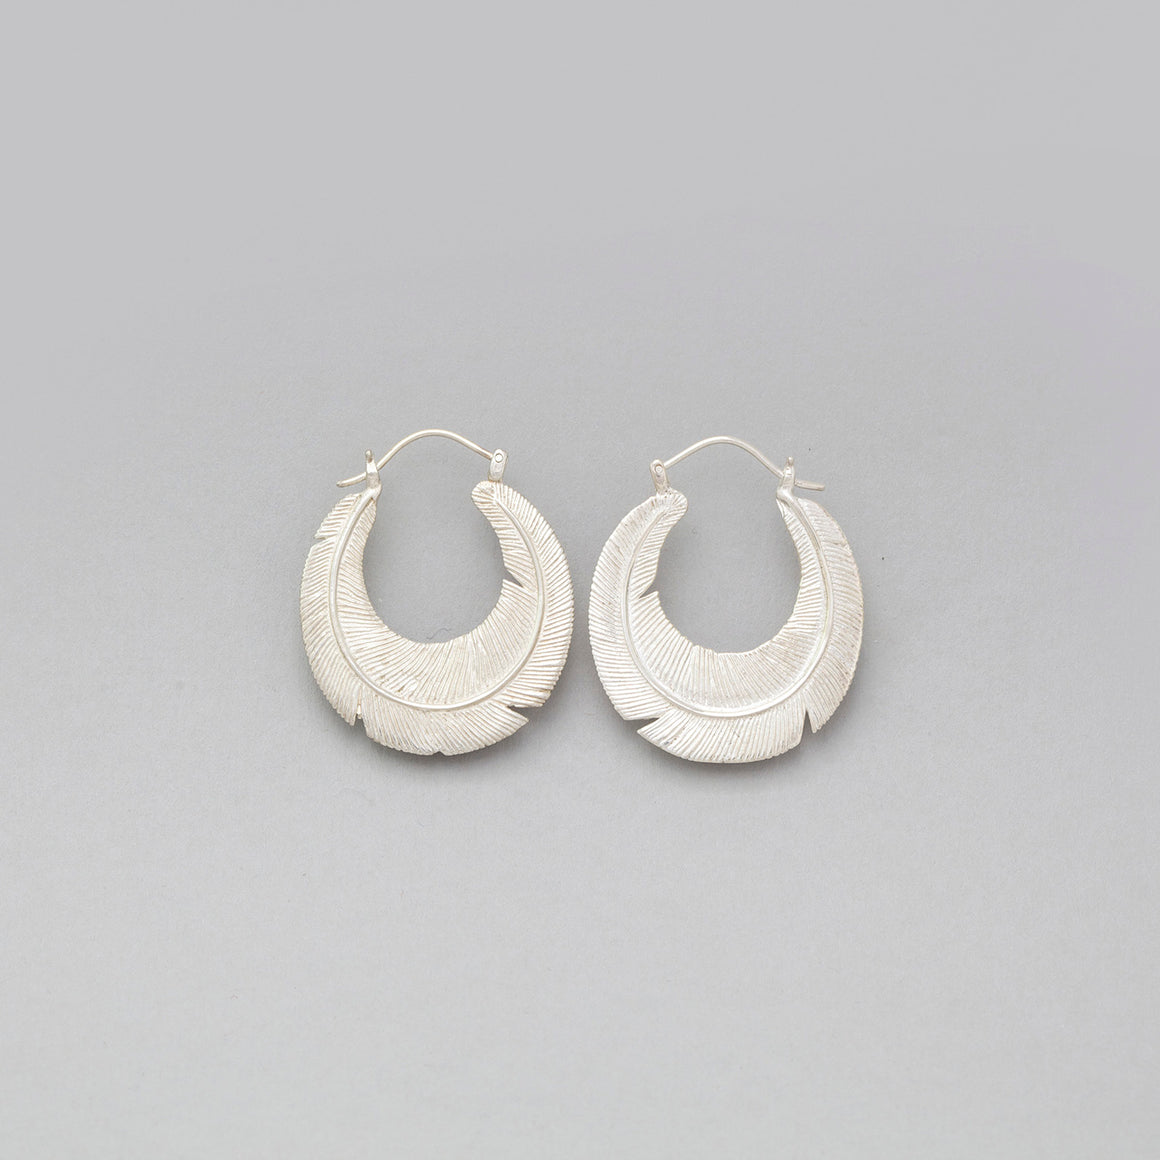 STERLING SILVER ROUNDED FEATHER HOOP EARRINGS